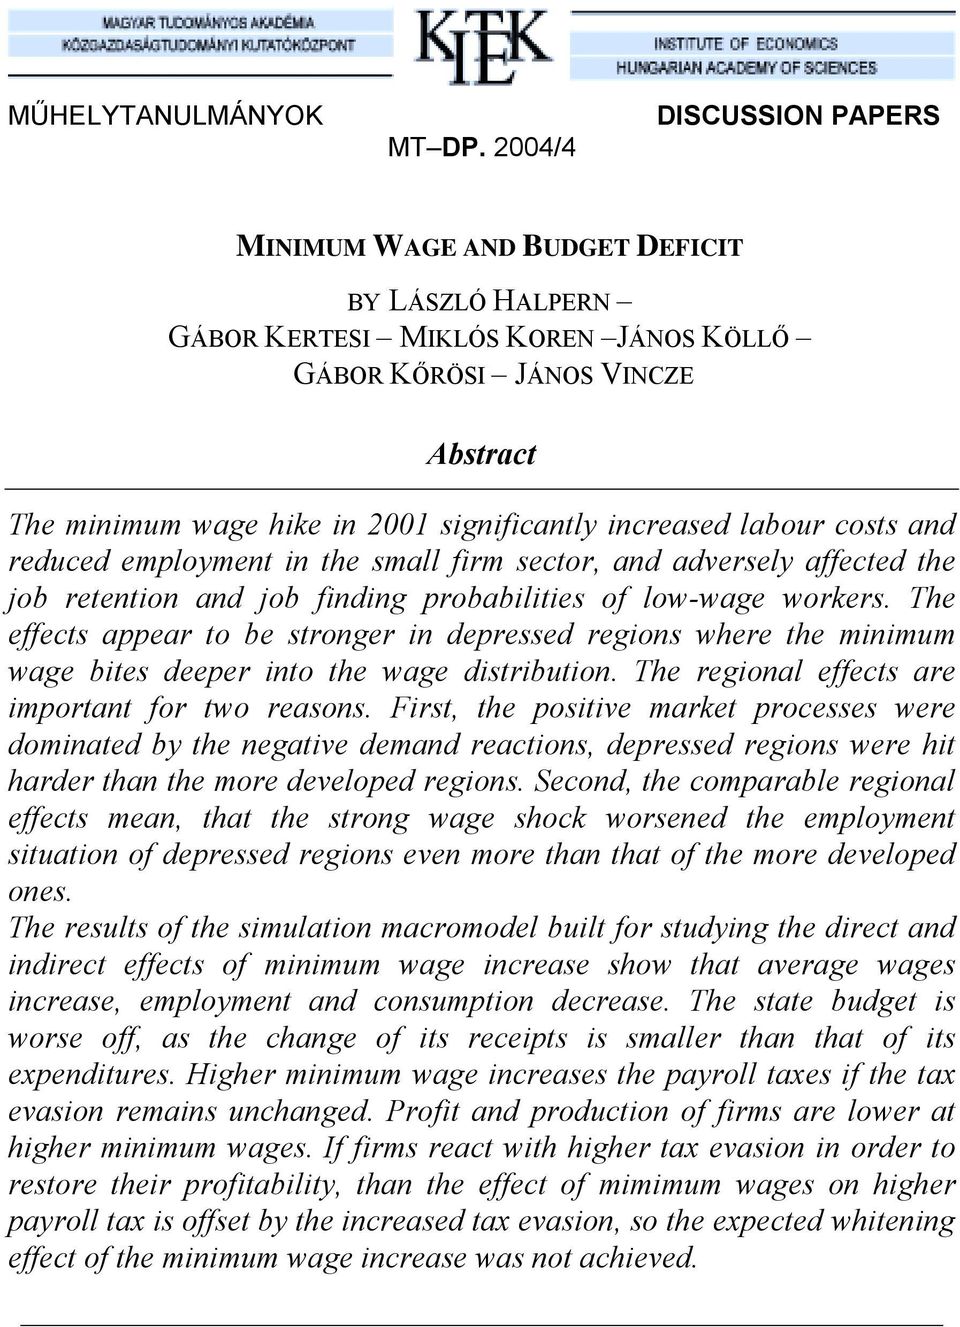 labour costs and reduced employment n the small frm sector, and adversely affected the job retenton and job fndng probabltes of low-wage workers.